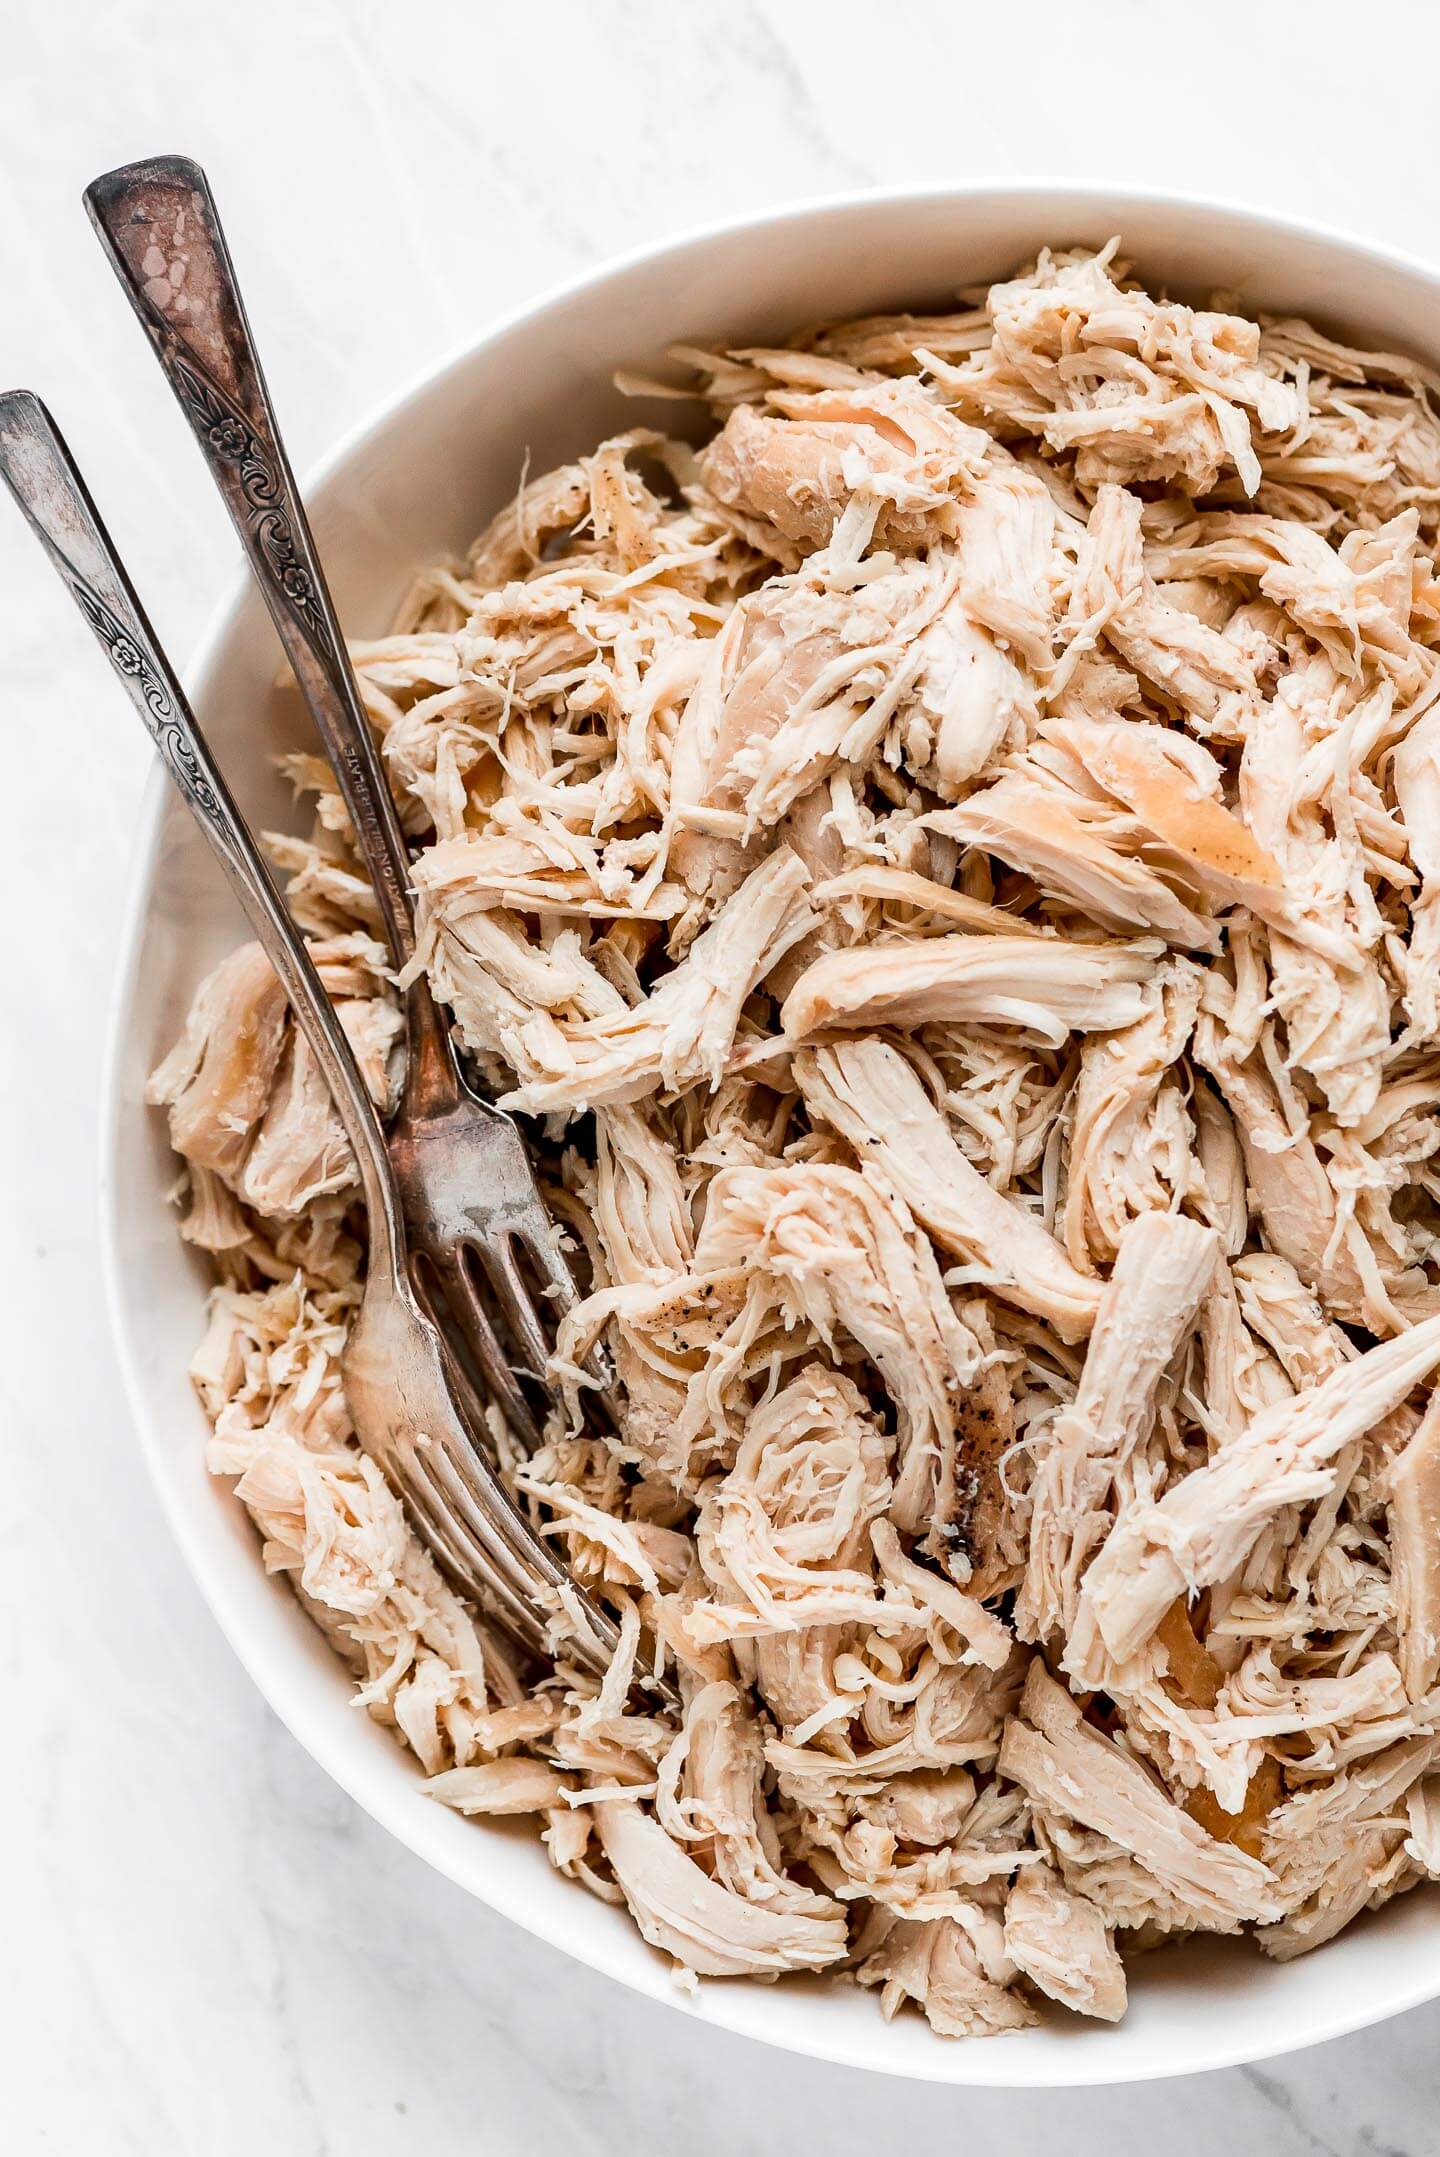 Top view of shredded chicken in a bowl with two forks in the side of the bowl.